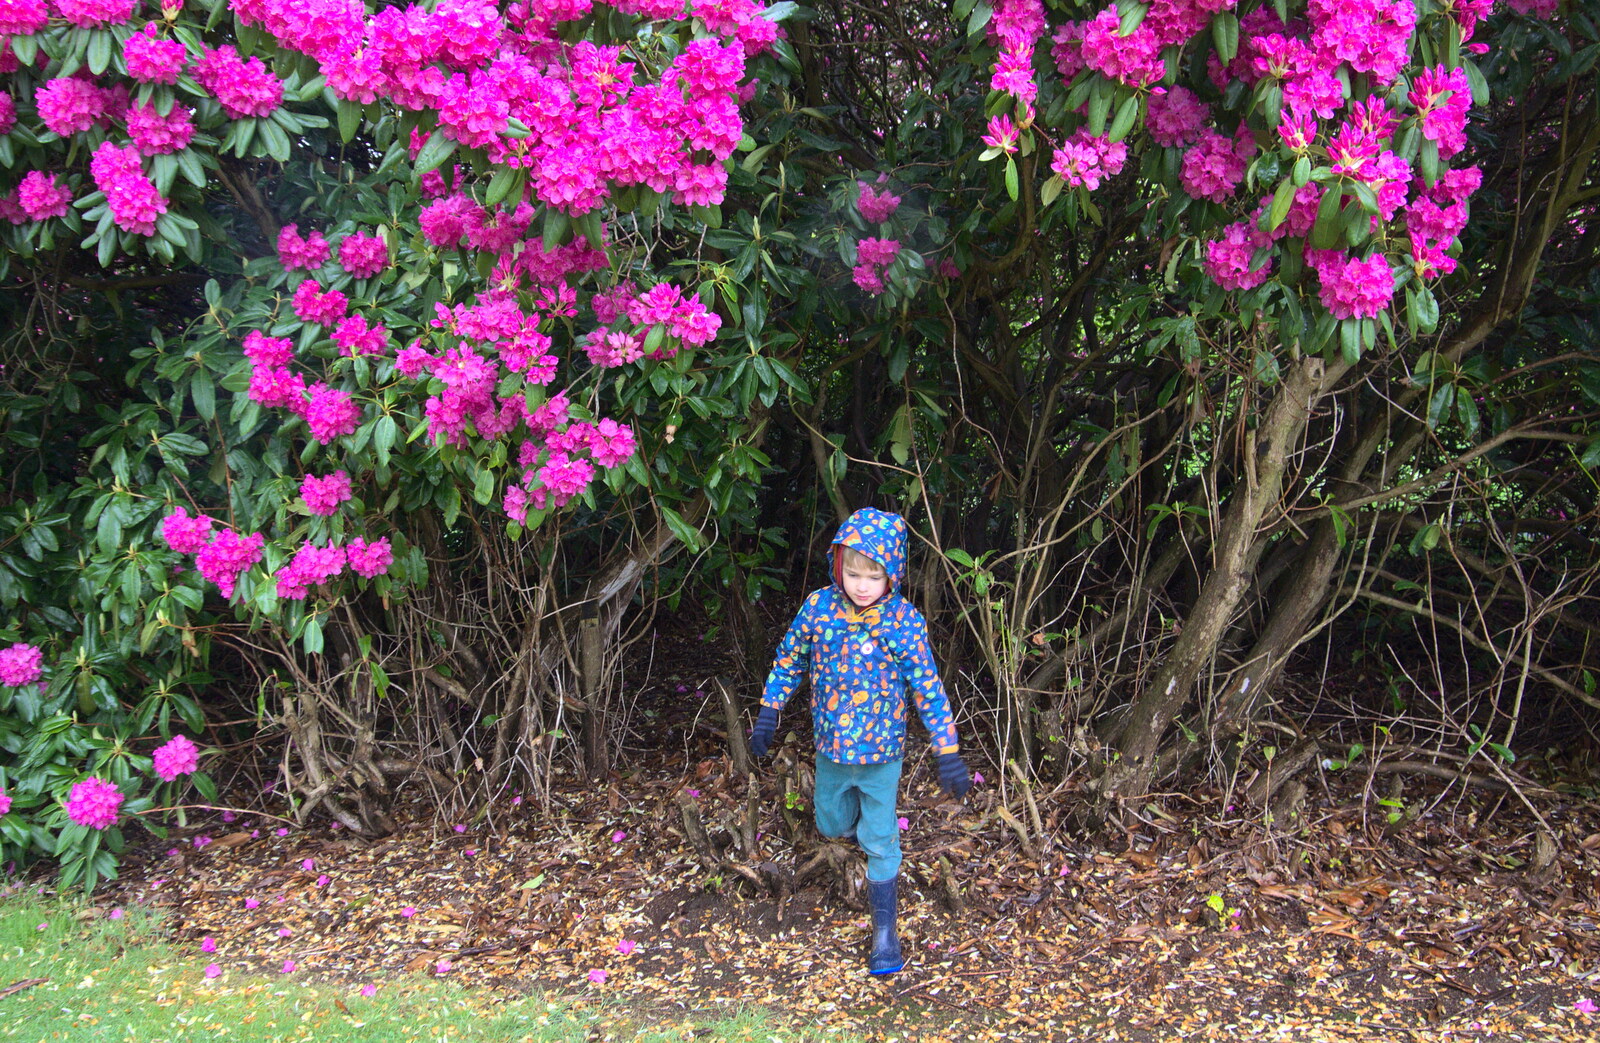 Harry appears from out of the rhododendron bush from A Trip to Blickling Hall, Aylsham, Norfolk - 29th April 2018